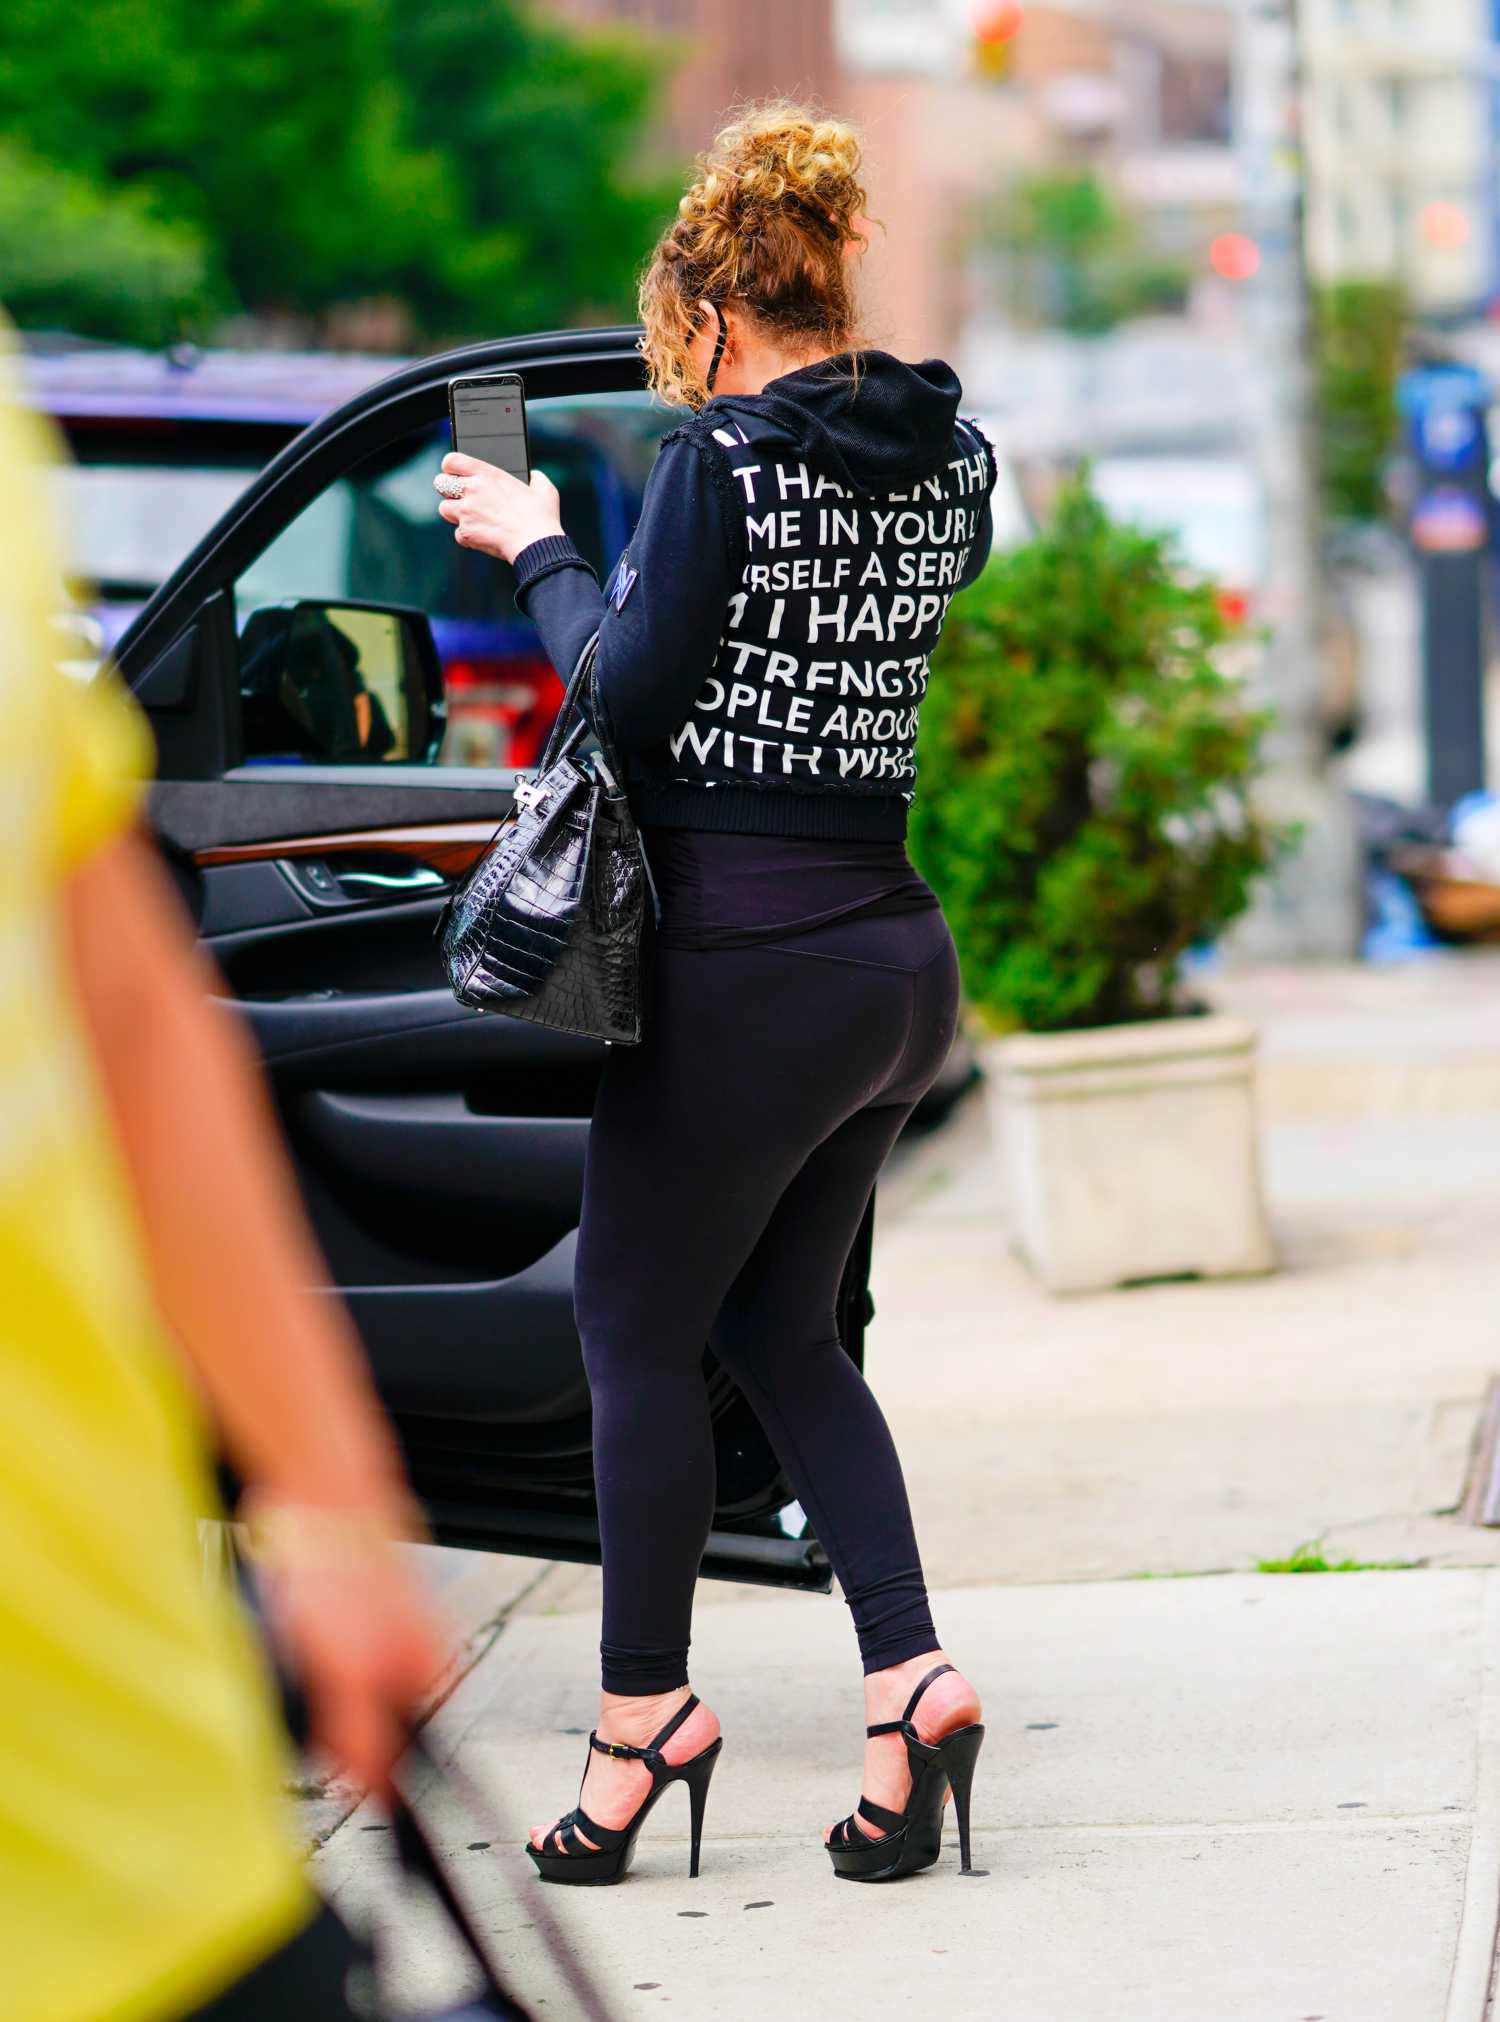 Mariah Carey in a Black Leggings Was Seen Out in New York – Celeb Donut